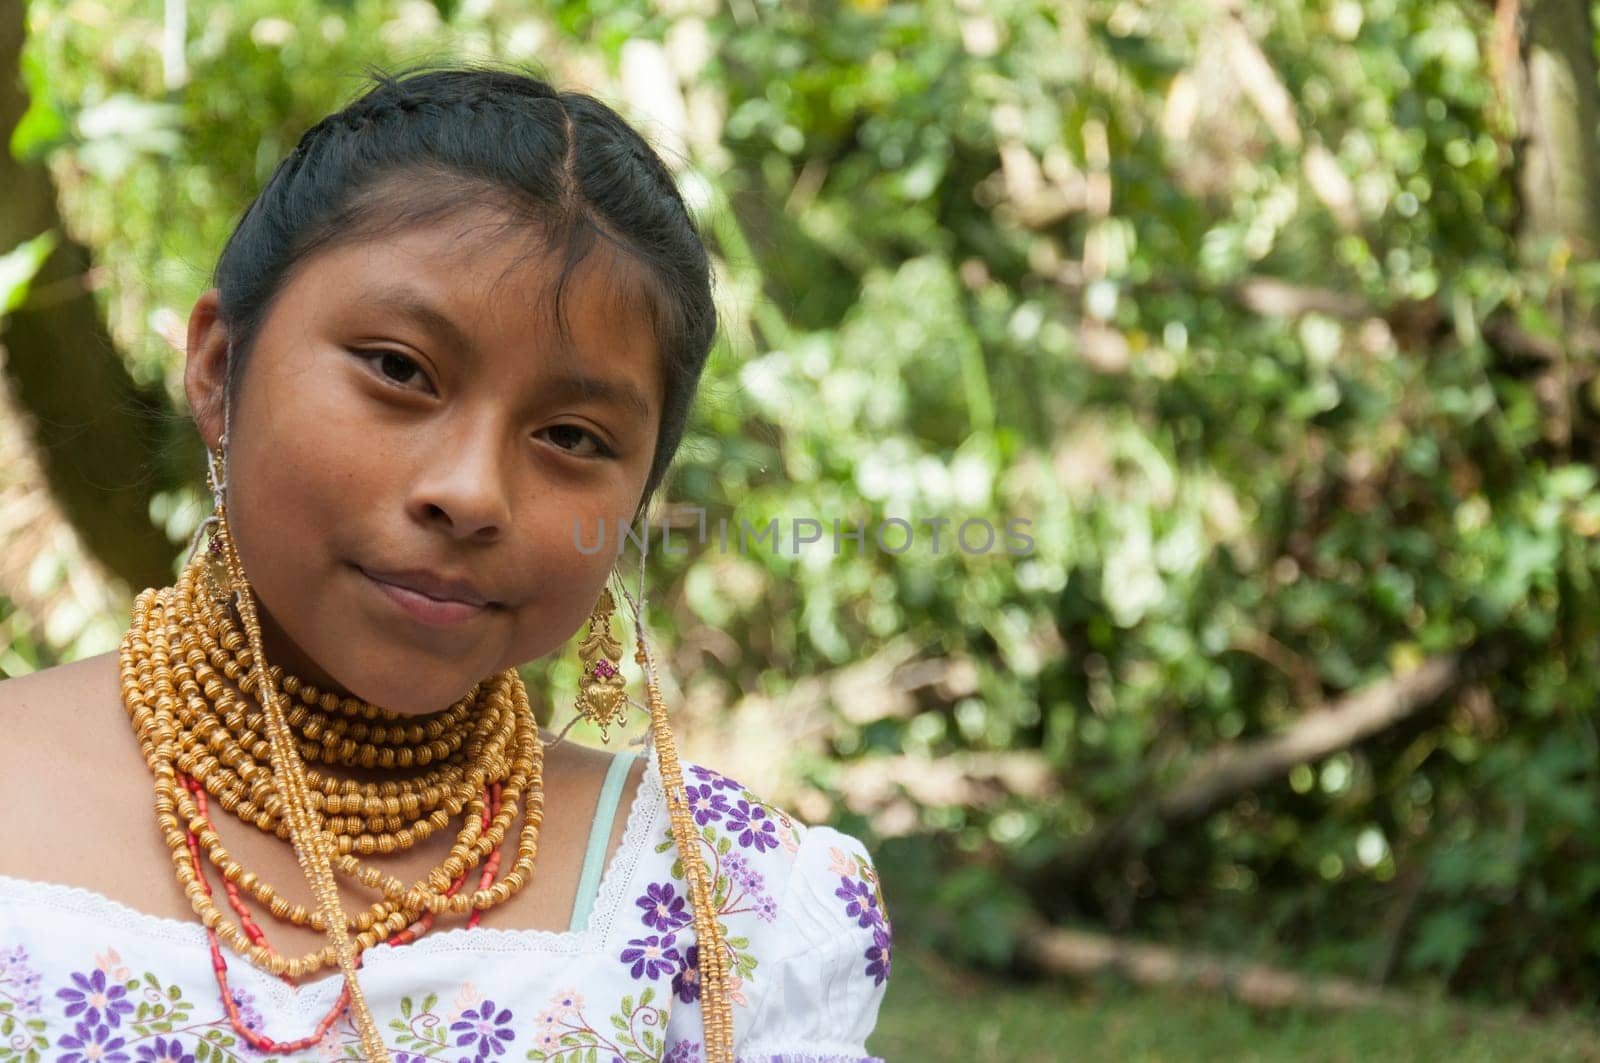 Cultural Richness: Close-up Portrait of a Colombian Indigenous Beauty Adorned in Traditional Attire and Gold Jewelry by Raulmartin